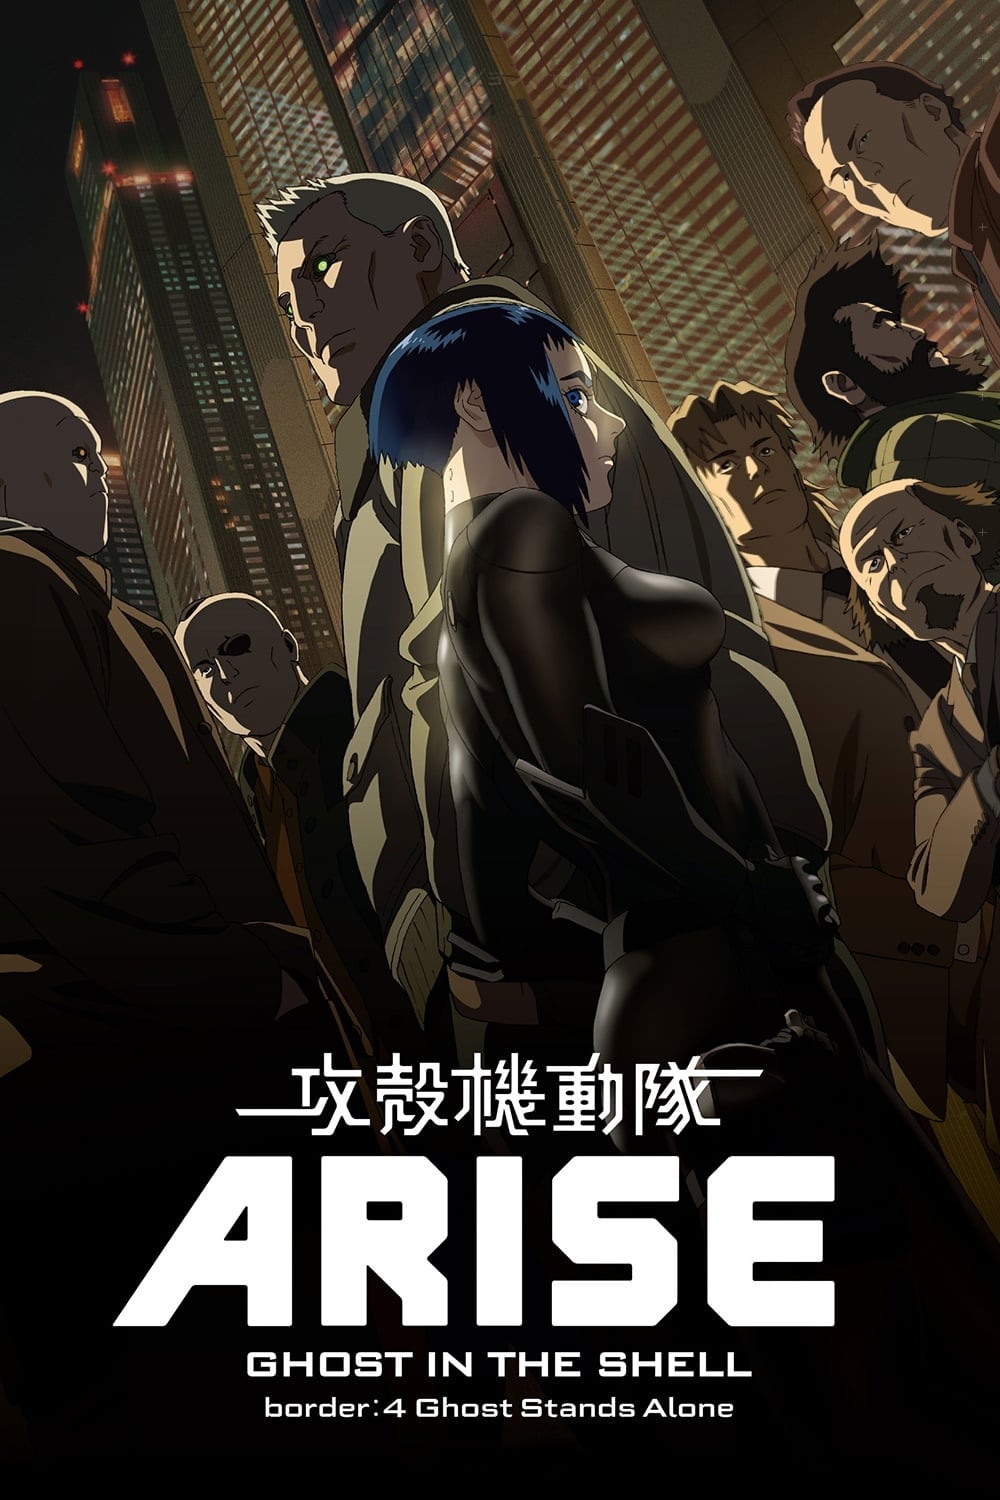 Ghost in the Shell Arise - Border 4: Ghost Stands Alone film